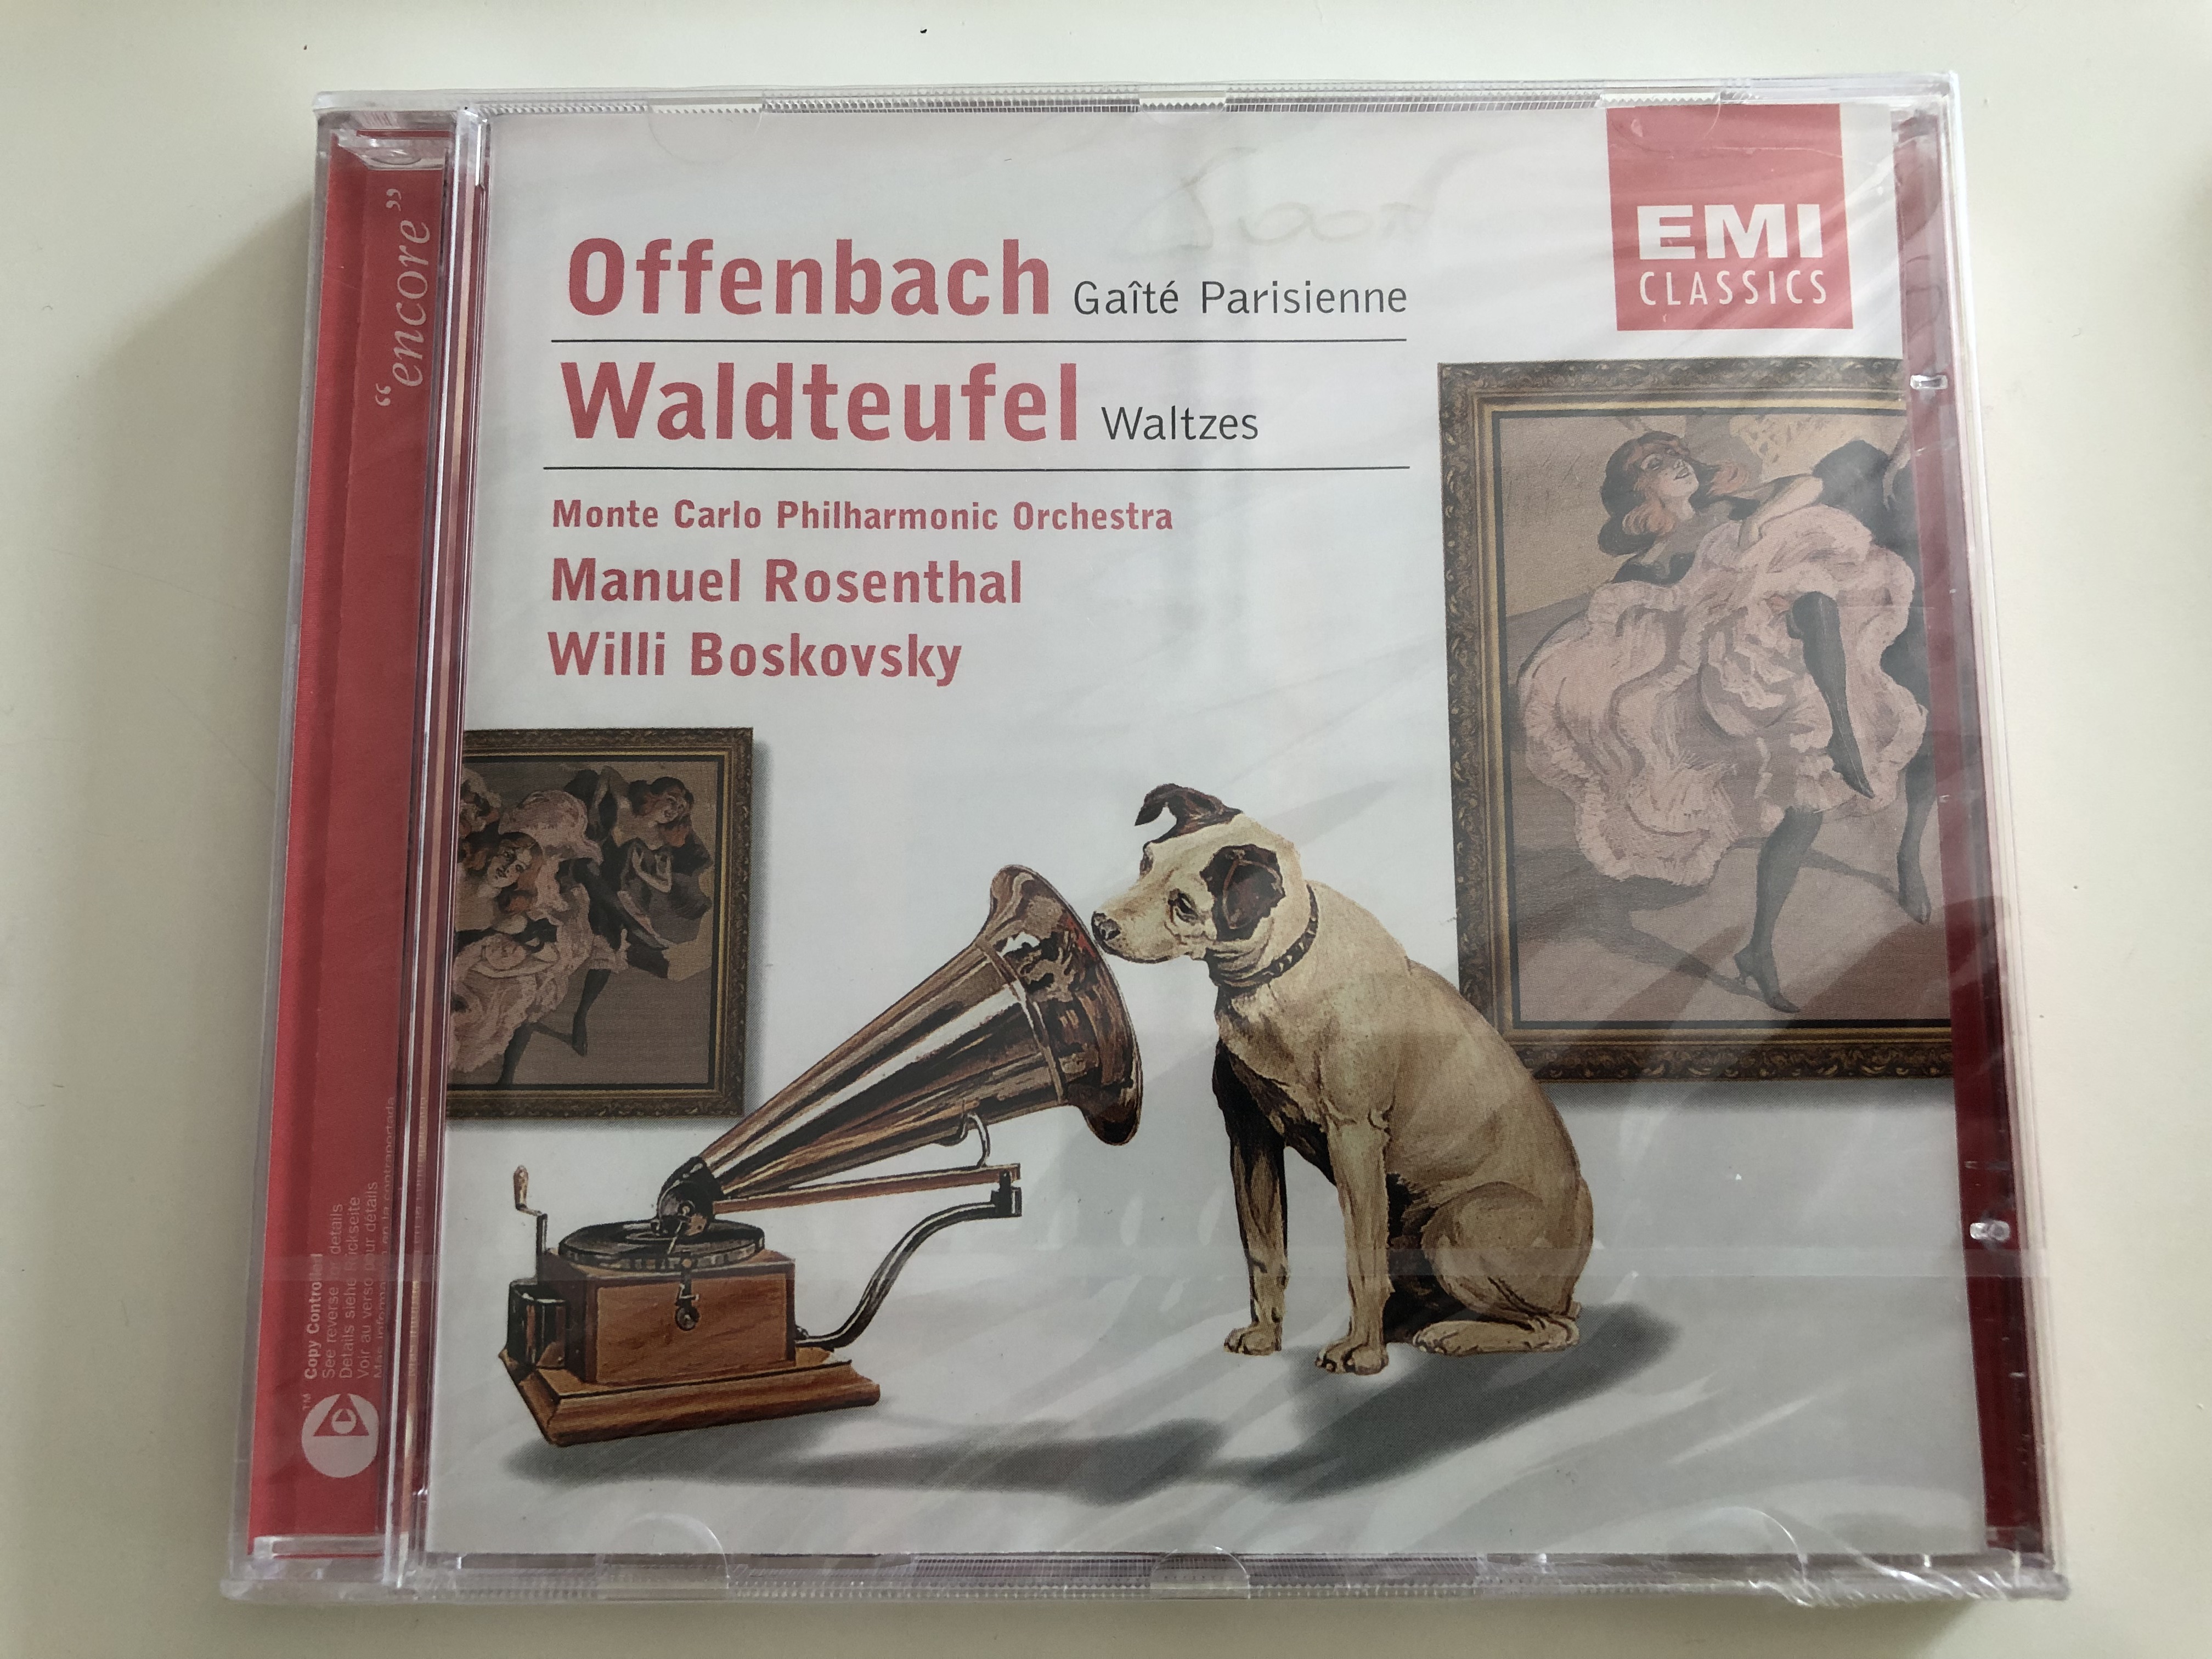 offenbach-gait-parisienne-waldteufel-waltzes-monte-carlo-philharmonic-orchestra-conducted-by-manuel-rosenthal-willi-boskovsky-emi-classic-audio-cd-2003-1-.jpg